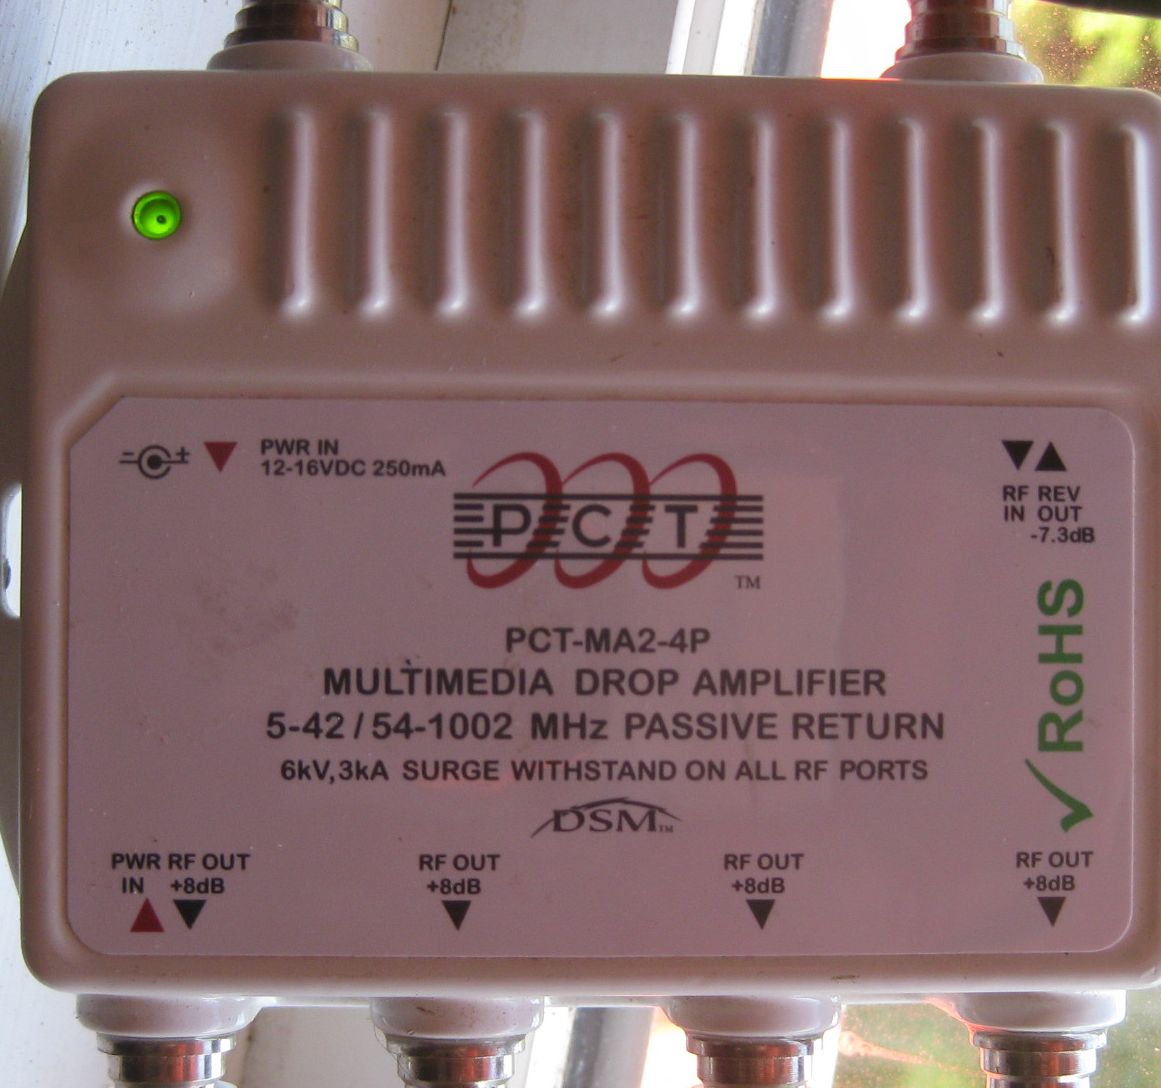 signal amplifier, you can see it enhances the signal by 8dB